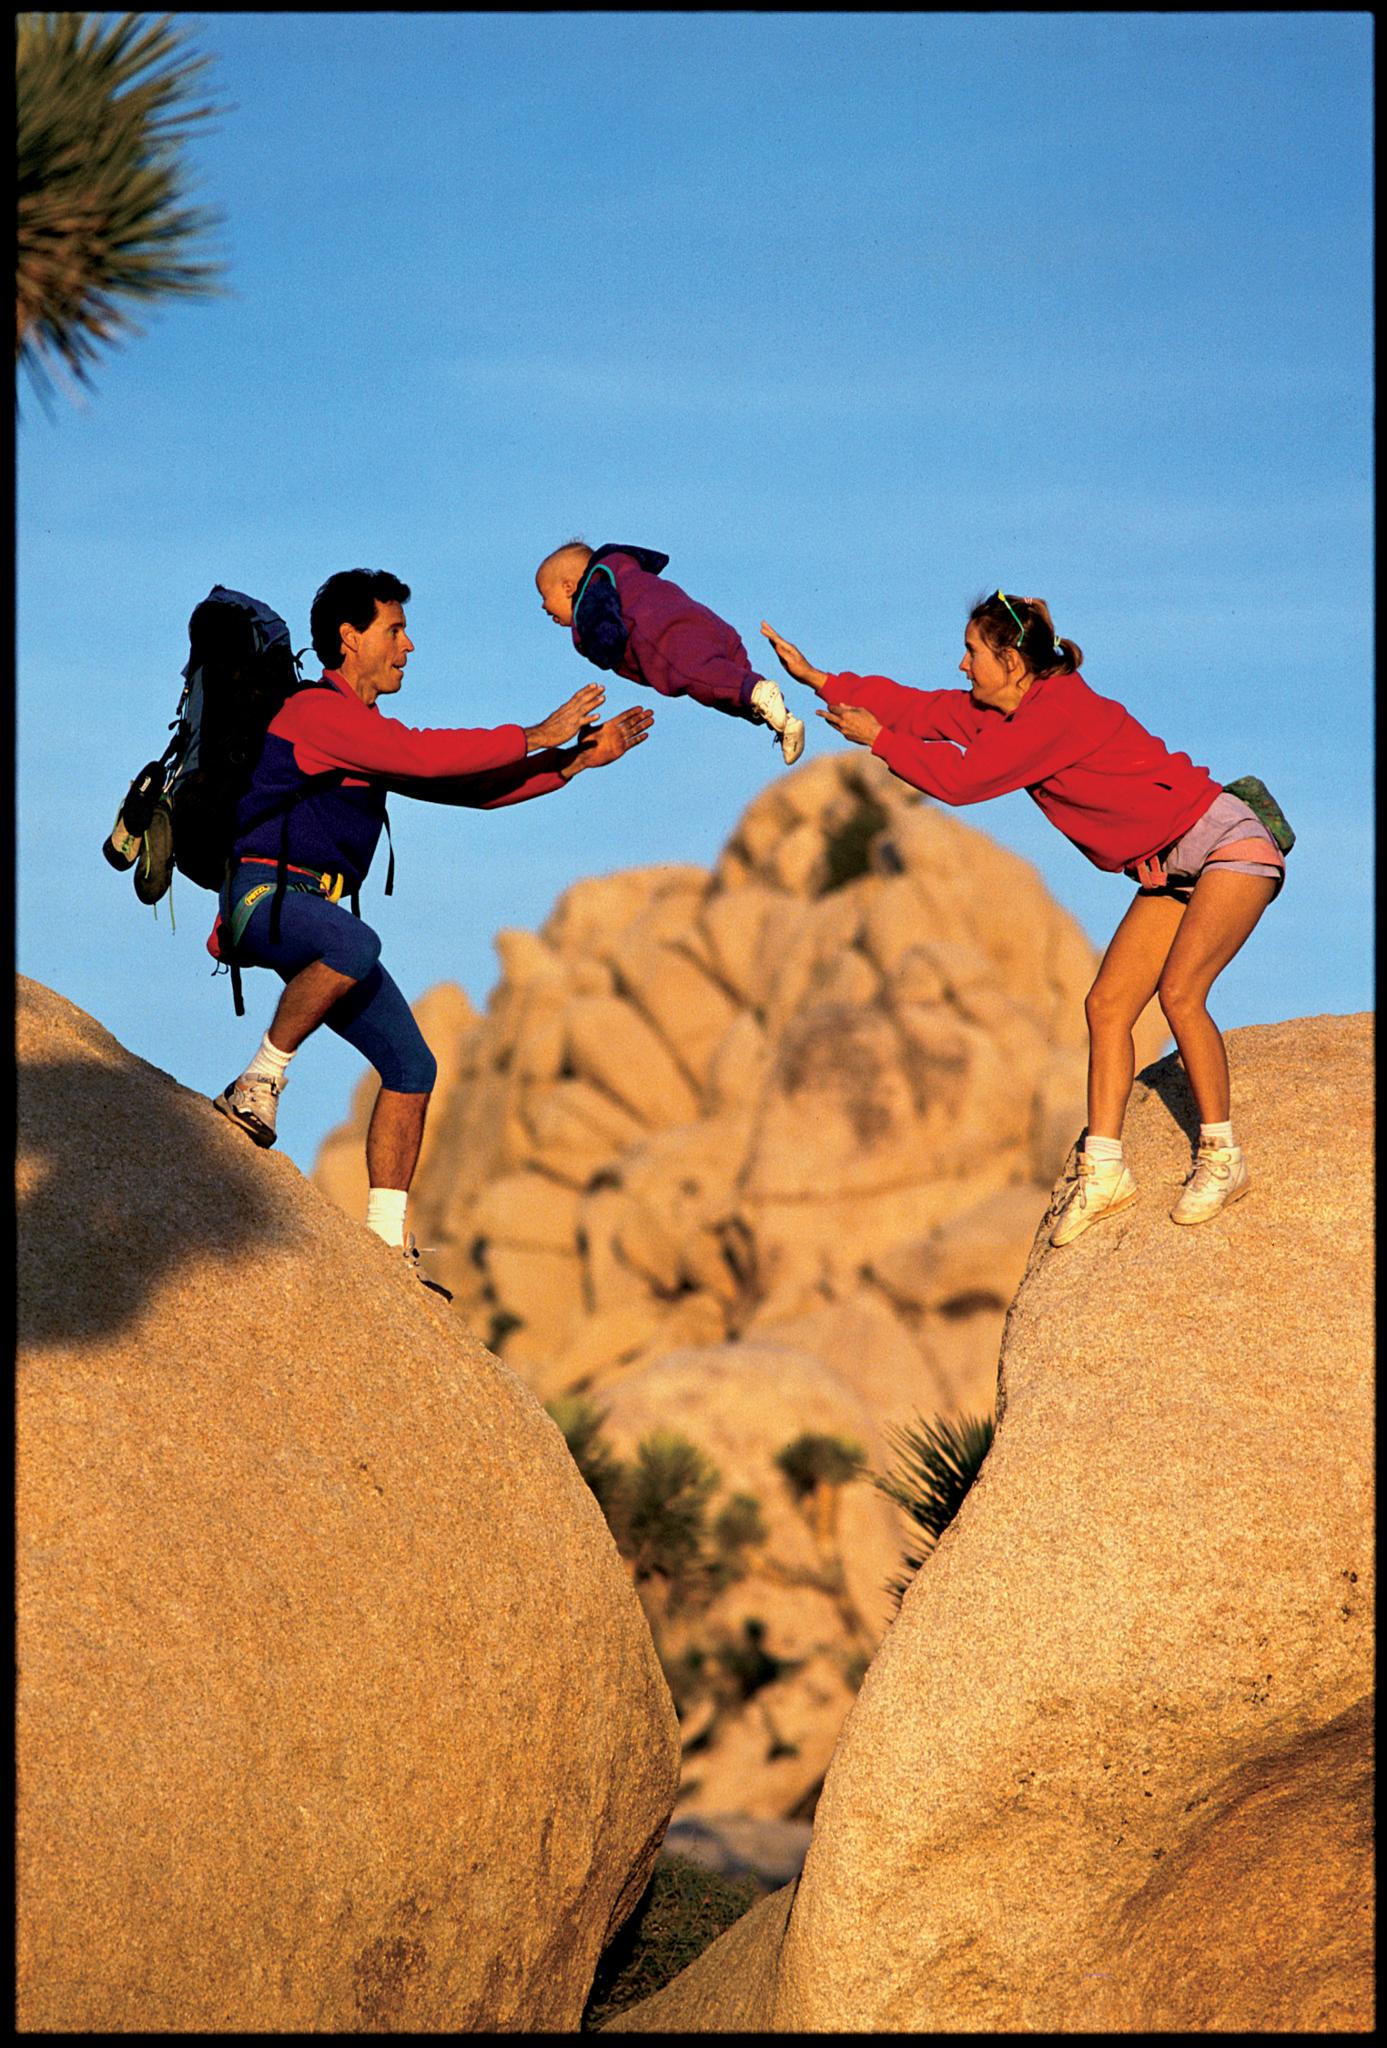 Patagonia on "We originally ran this photo in our Spring 1995 catalog. You probably seen it copied, reprinted, photoshopped and meme'd. But it's as real today as it was